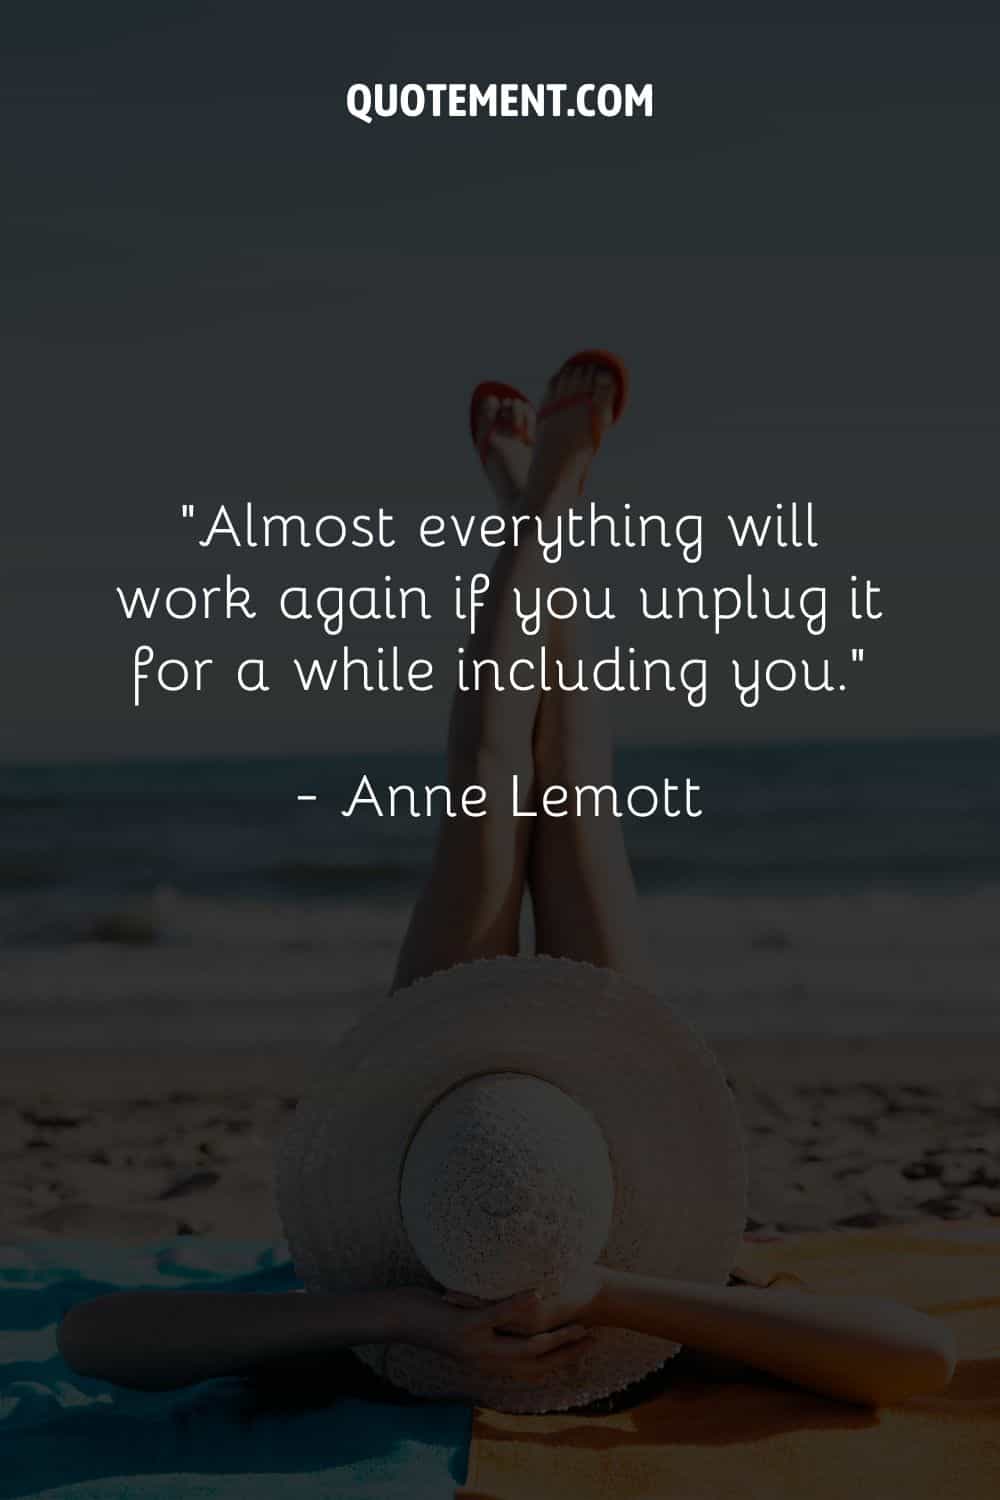 Almost everything will work again if you unplug it for a while including you